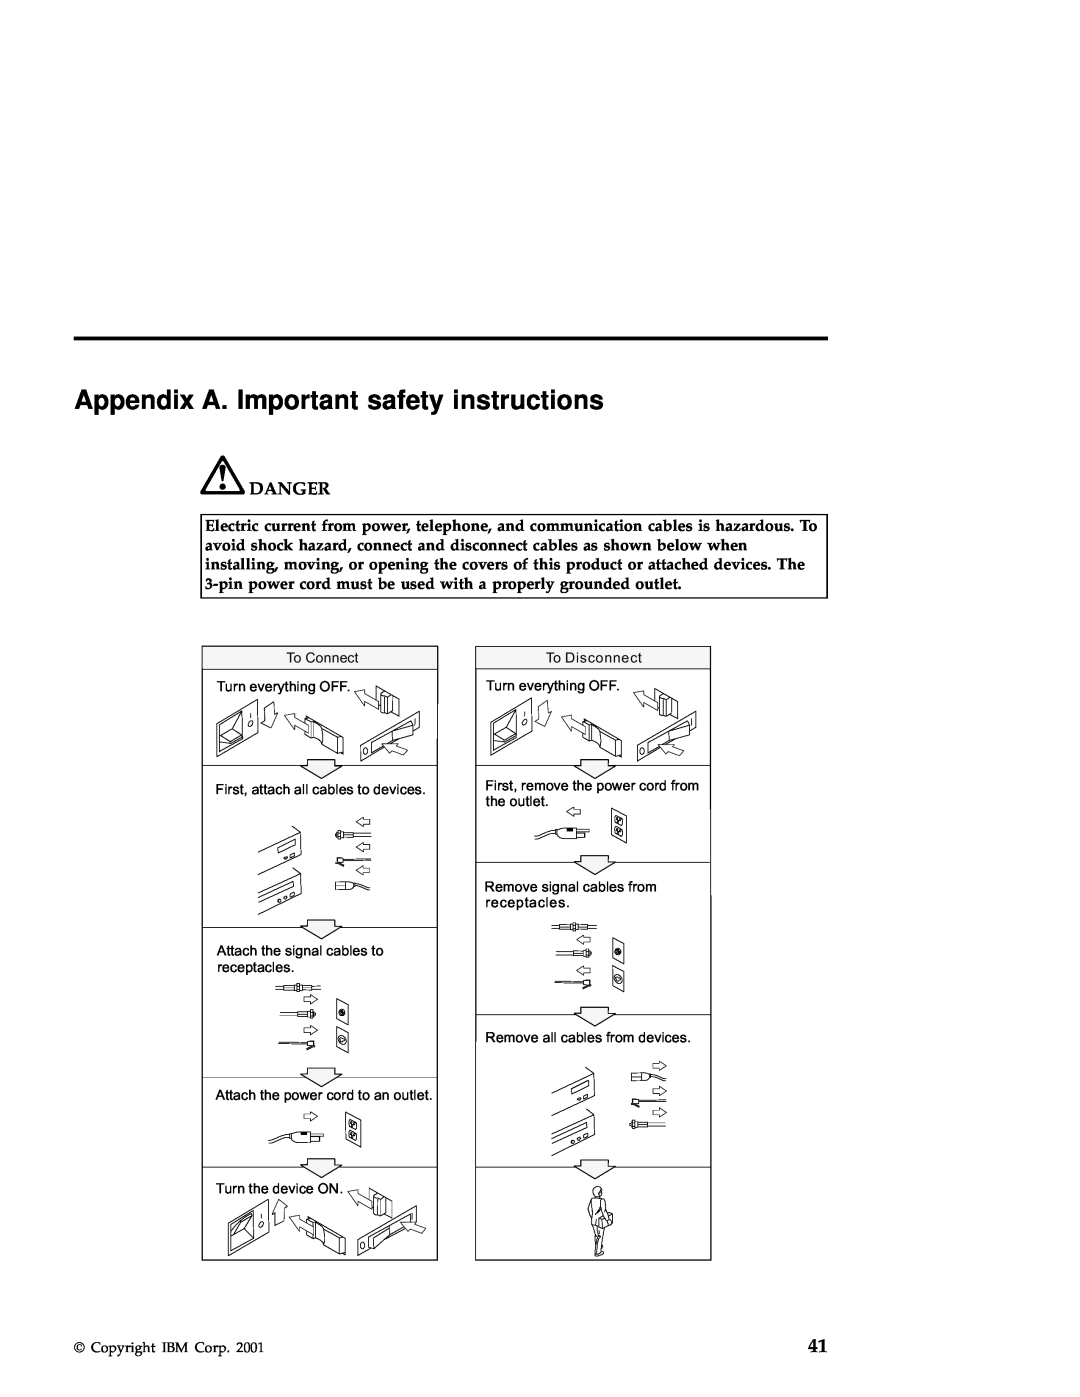 IBM A22 manual Appendix A. Important safety instructions, Danger 